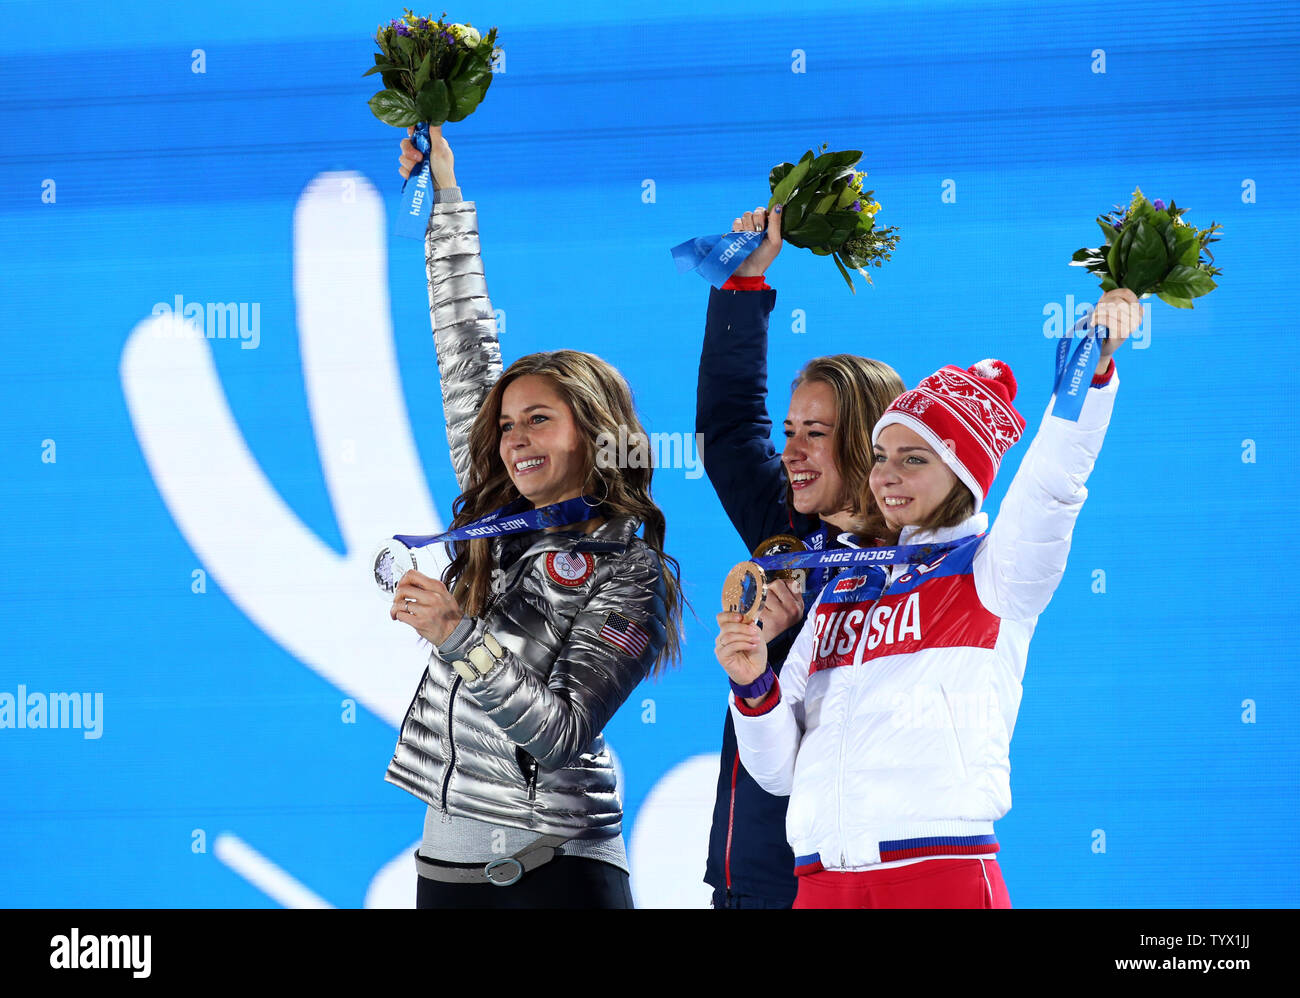 (From L to R) US athlete silver medalist Noelle Pikus-Pace, Great Britain's gold medalist Elizabeth Yarnold and Russia's bronze medalist Elena Nikitina jubilate during the medal ceremony for the women skeleton during the Sochi Winter Olympics on February 15, 2014.  UPI/Maya Vidon-White Stock Photo